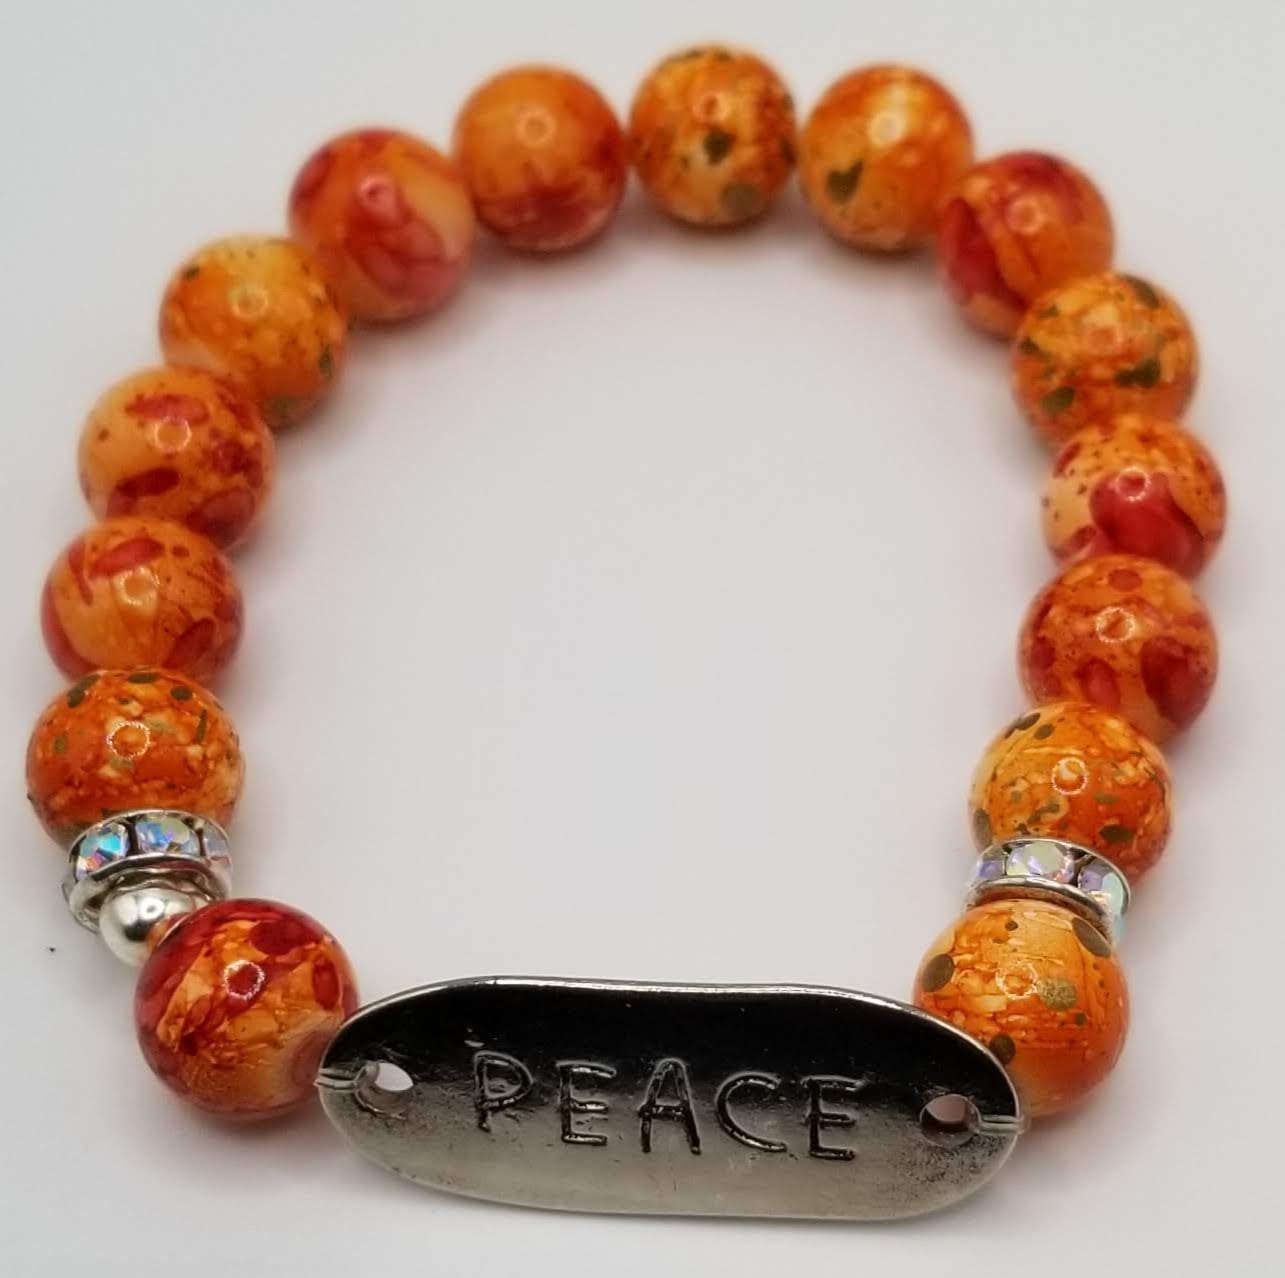 Handcrafted Jewelry By Teri C Stamped Peace